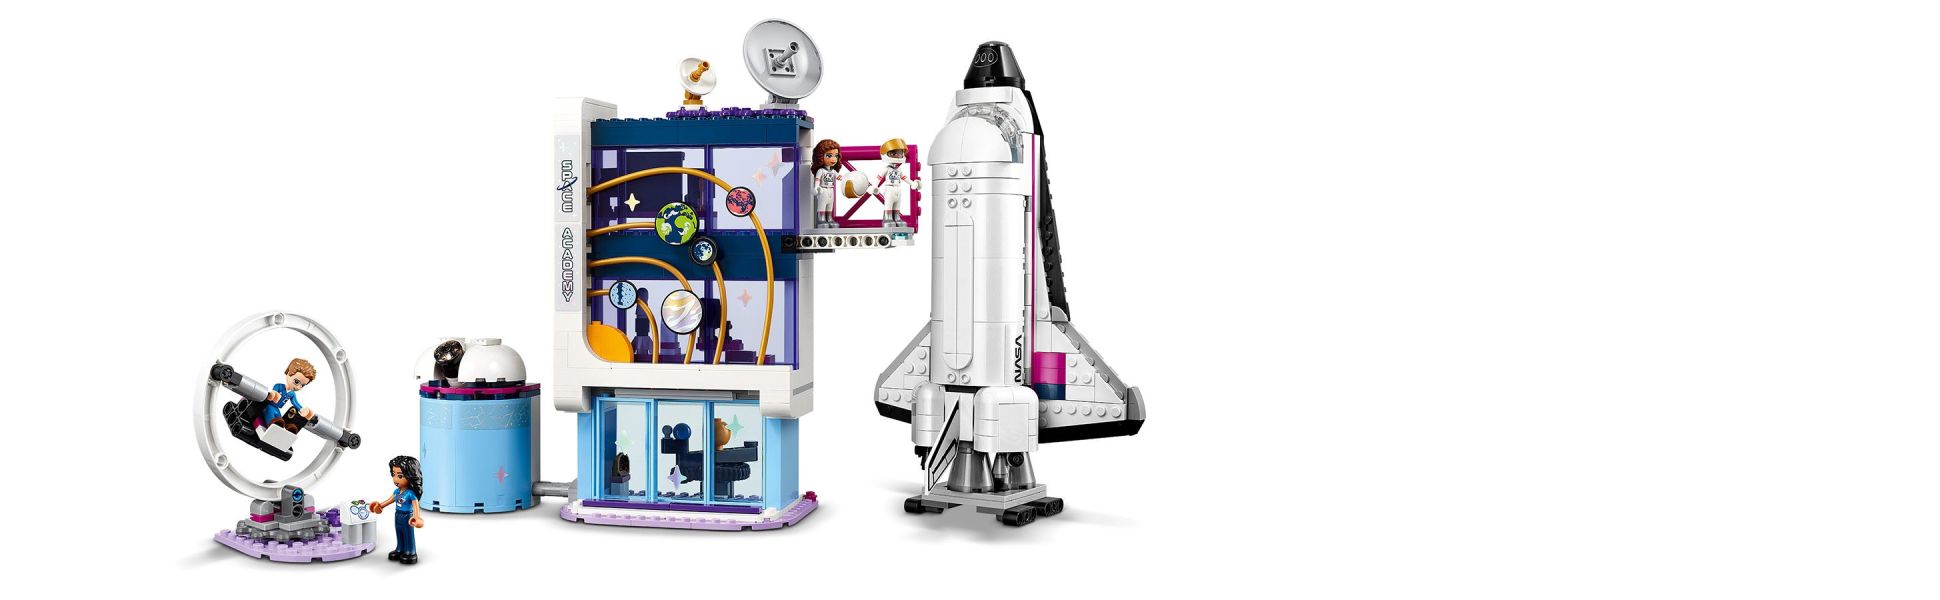 LEGO Friends Olivia’s Space Academy Shuttle Rocket 41713, NASA Space  Shuttle Toy for Kids, Pretend Play Space Academy with Astronaut Mini  Figures,